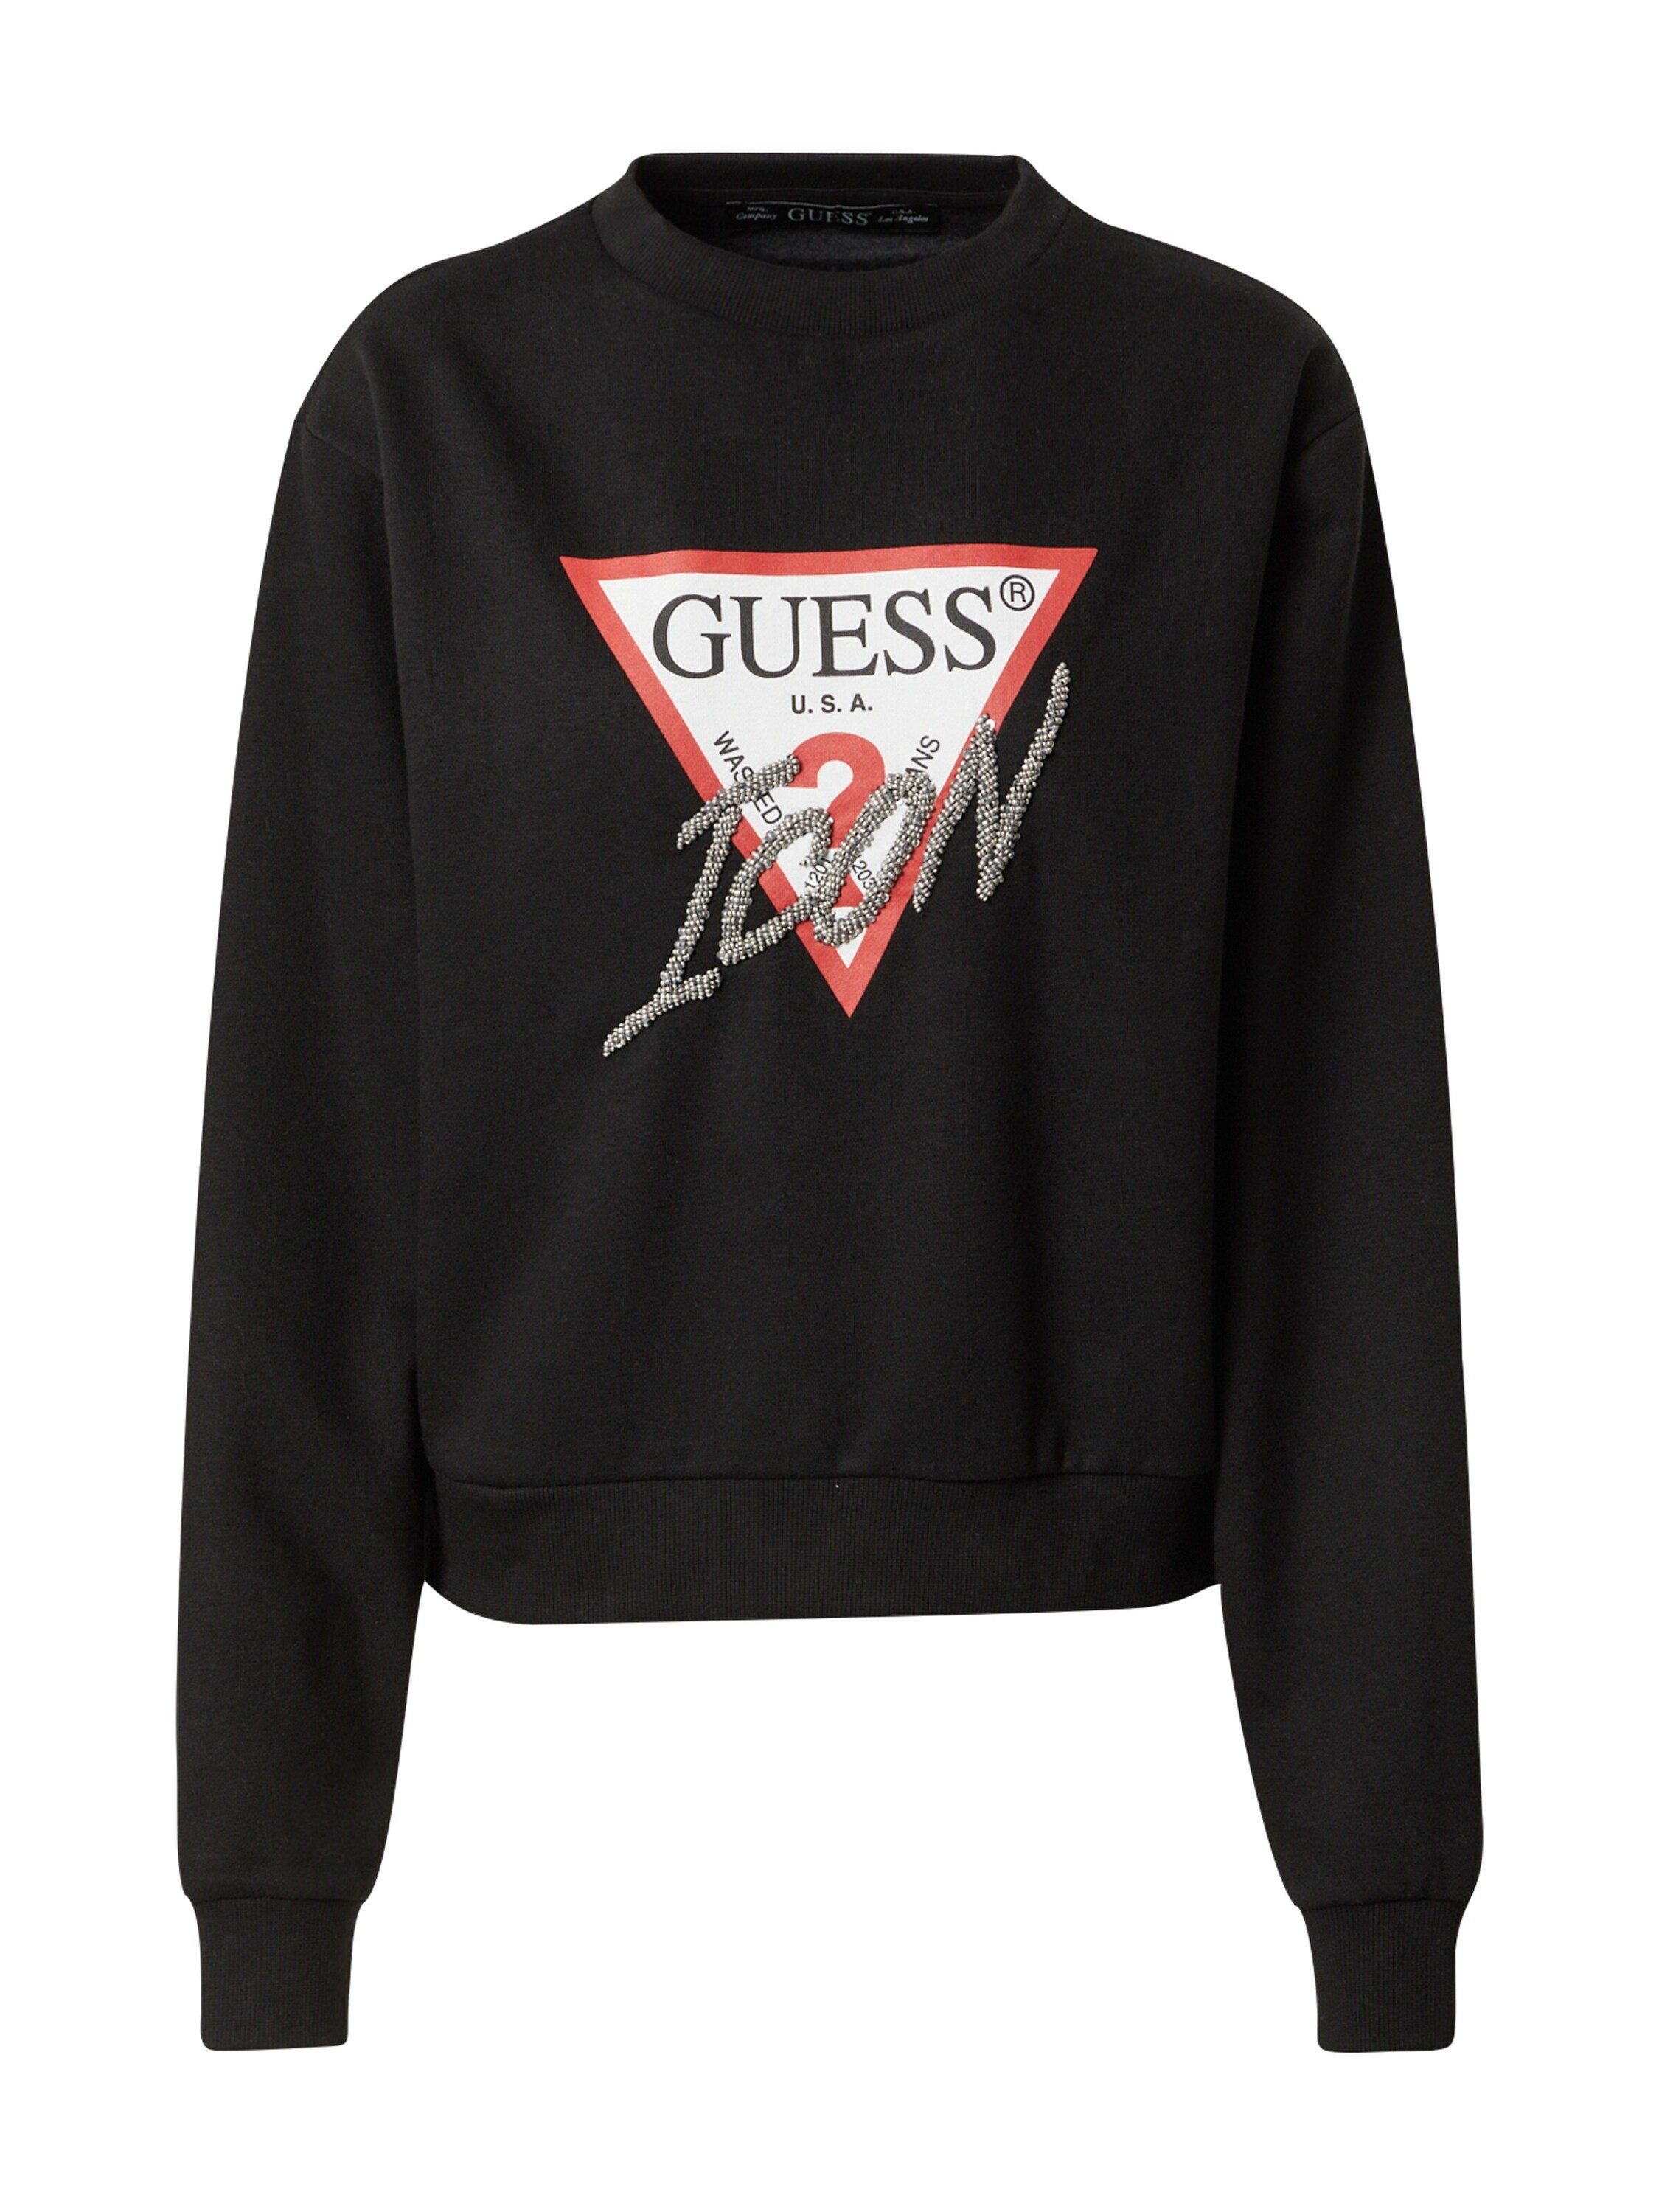 Guess Pullover online kaufen | OTTO